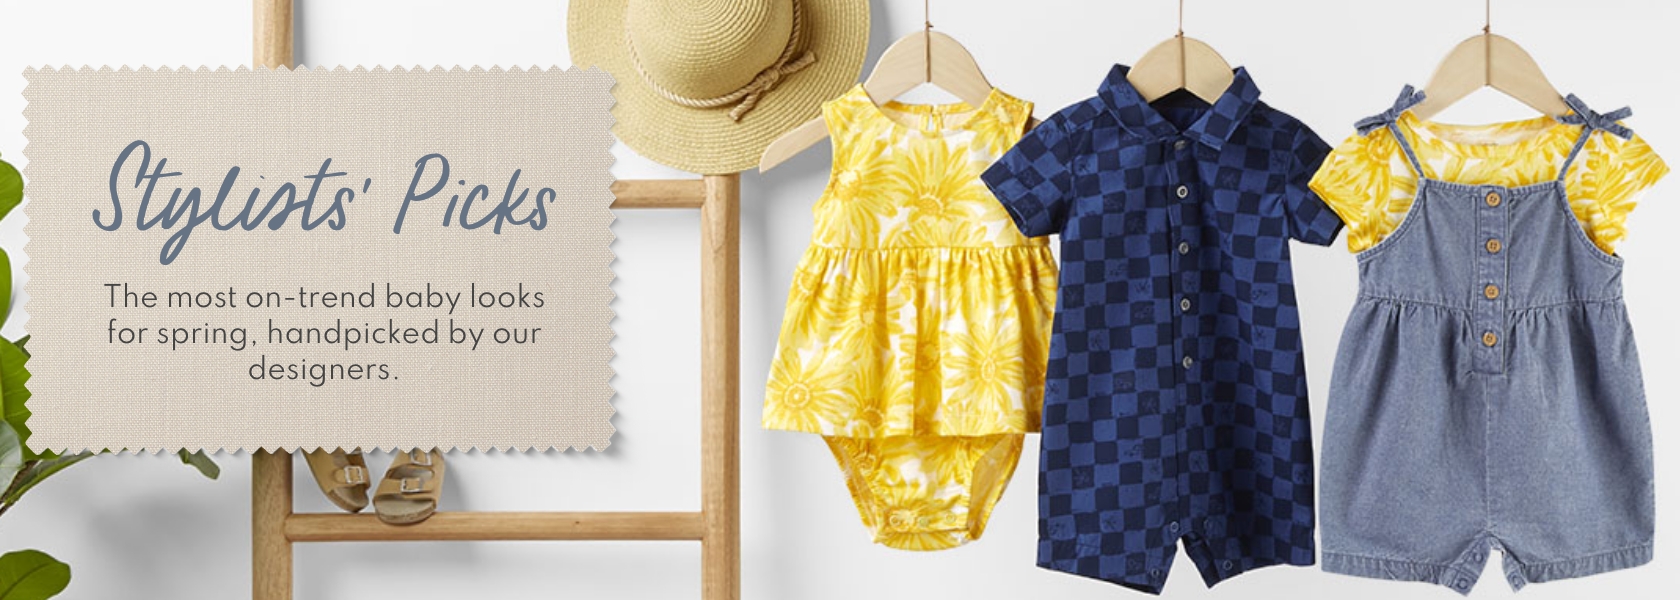 Stylists' Picks | The most on-trend looks for summer, handpicked by our designers.